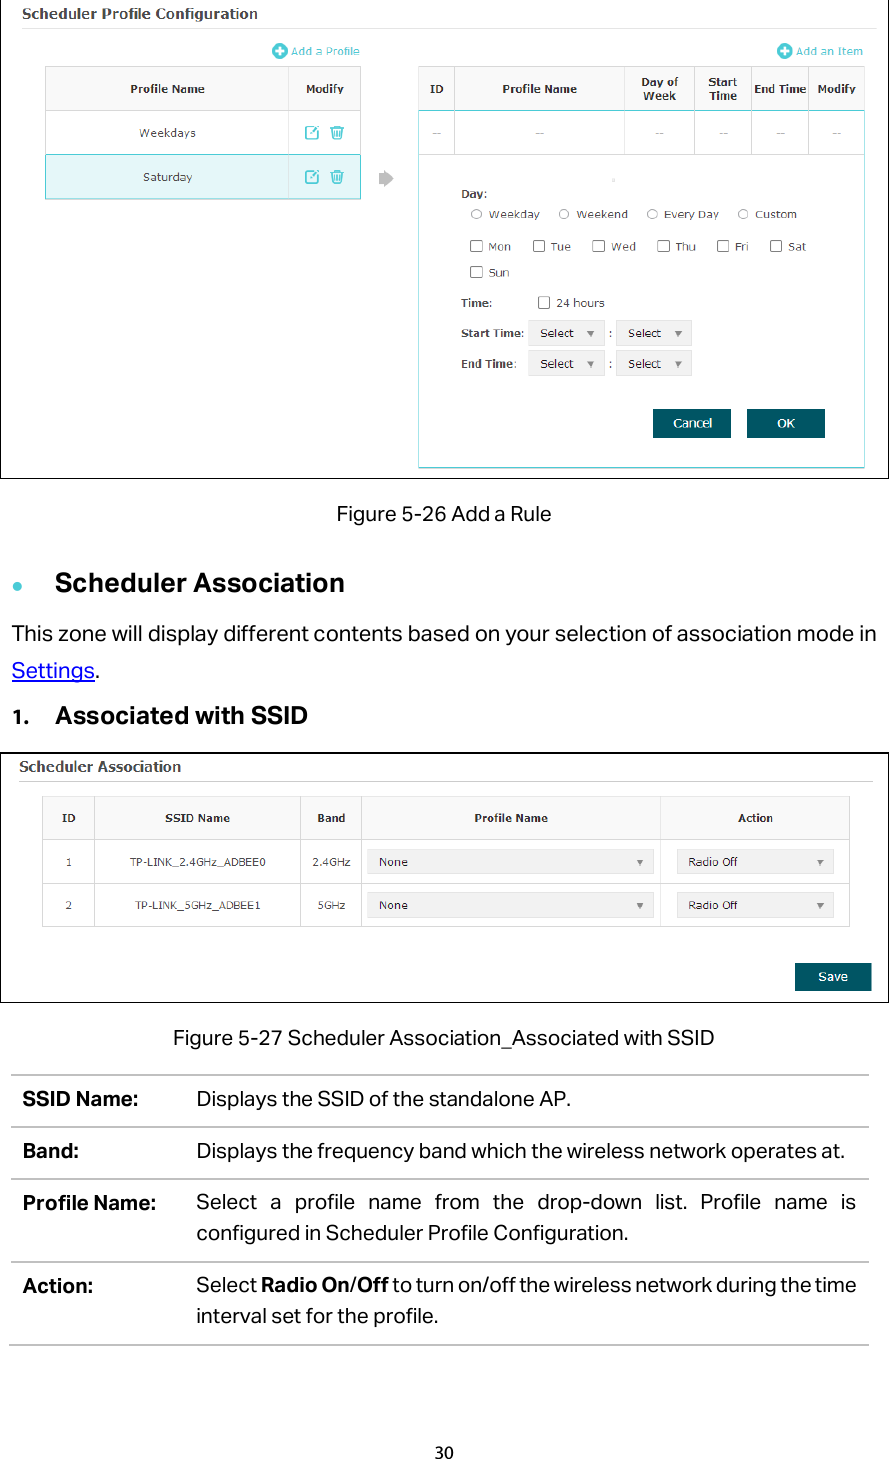  Figure 5-26 Add a Rule  Scheduler Association This zone will display different contents based on your selection of association mode in Settings. 1. Associated with SSID  Figure 5-27 Scheduler Association_Associated with SSID SSID Name: Displays the SSID of the standalone AP. Band: Displays the frequency band which the wireless network operates at.   Profile Name: Select a profile name from the drop-down list. Profile name is configured in Scheduler Profile Configuration. Action: Select Radio On/Off to turn on/off the wireless network during the time interval set for the profile.   30  